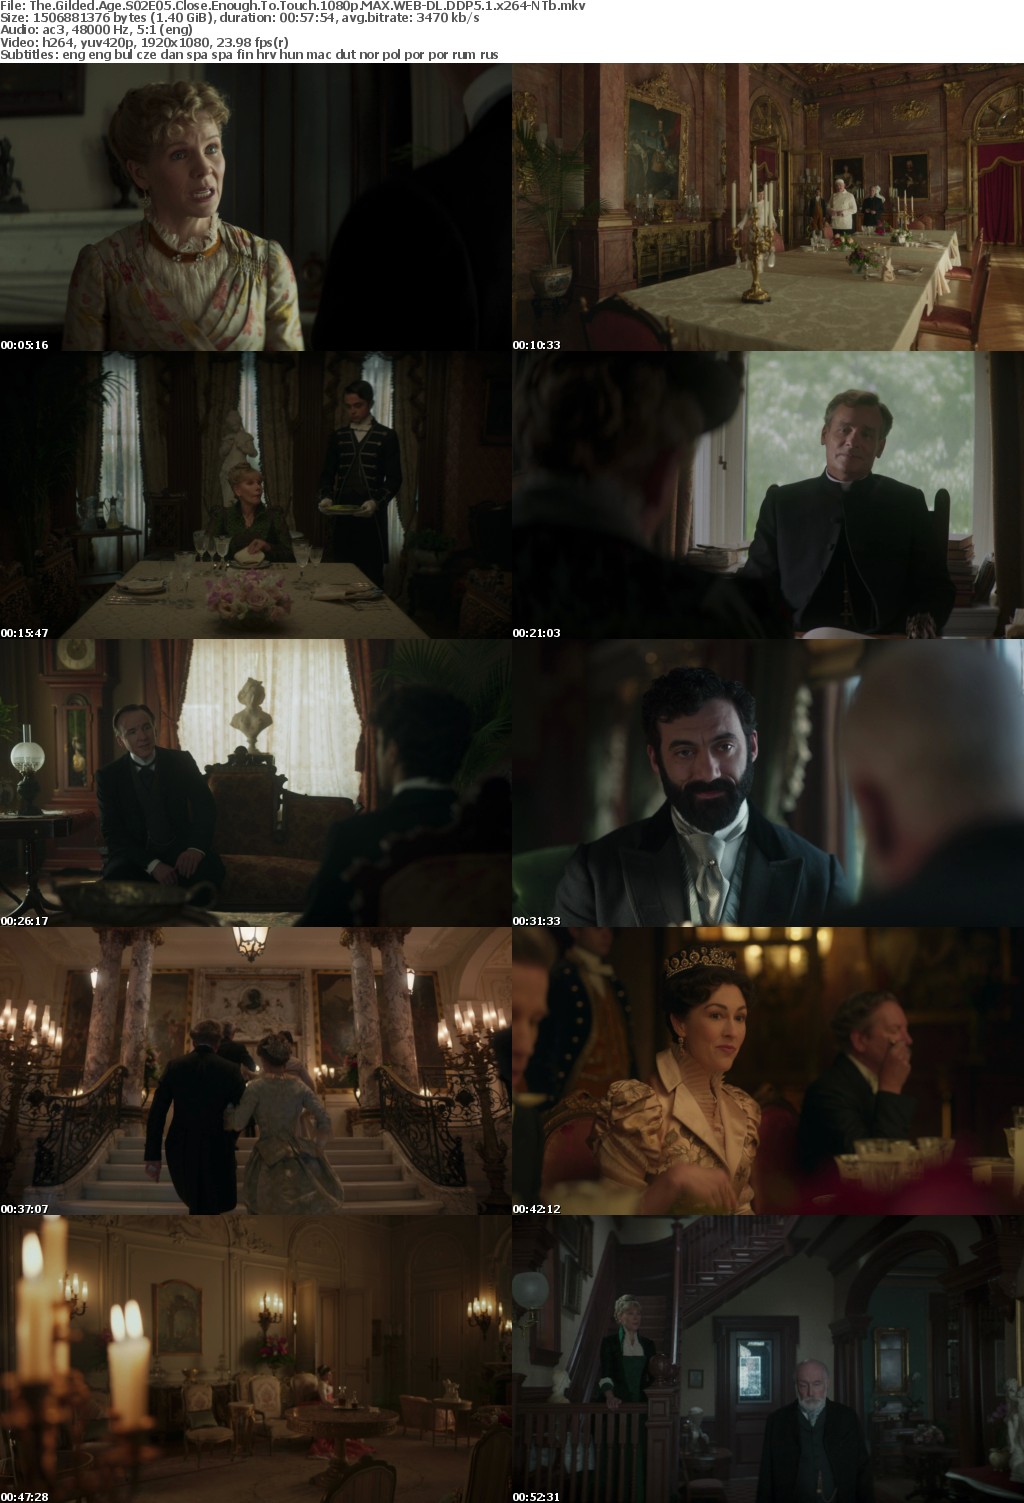 The Gilded Age S02E05 Close Enough To Touch 1080p MAX WEB-DL DDP5 1 x264-NTb